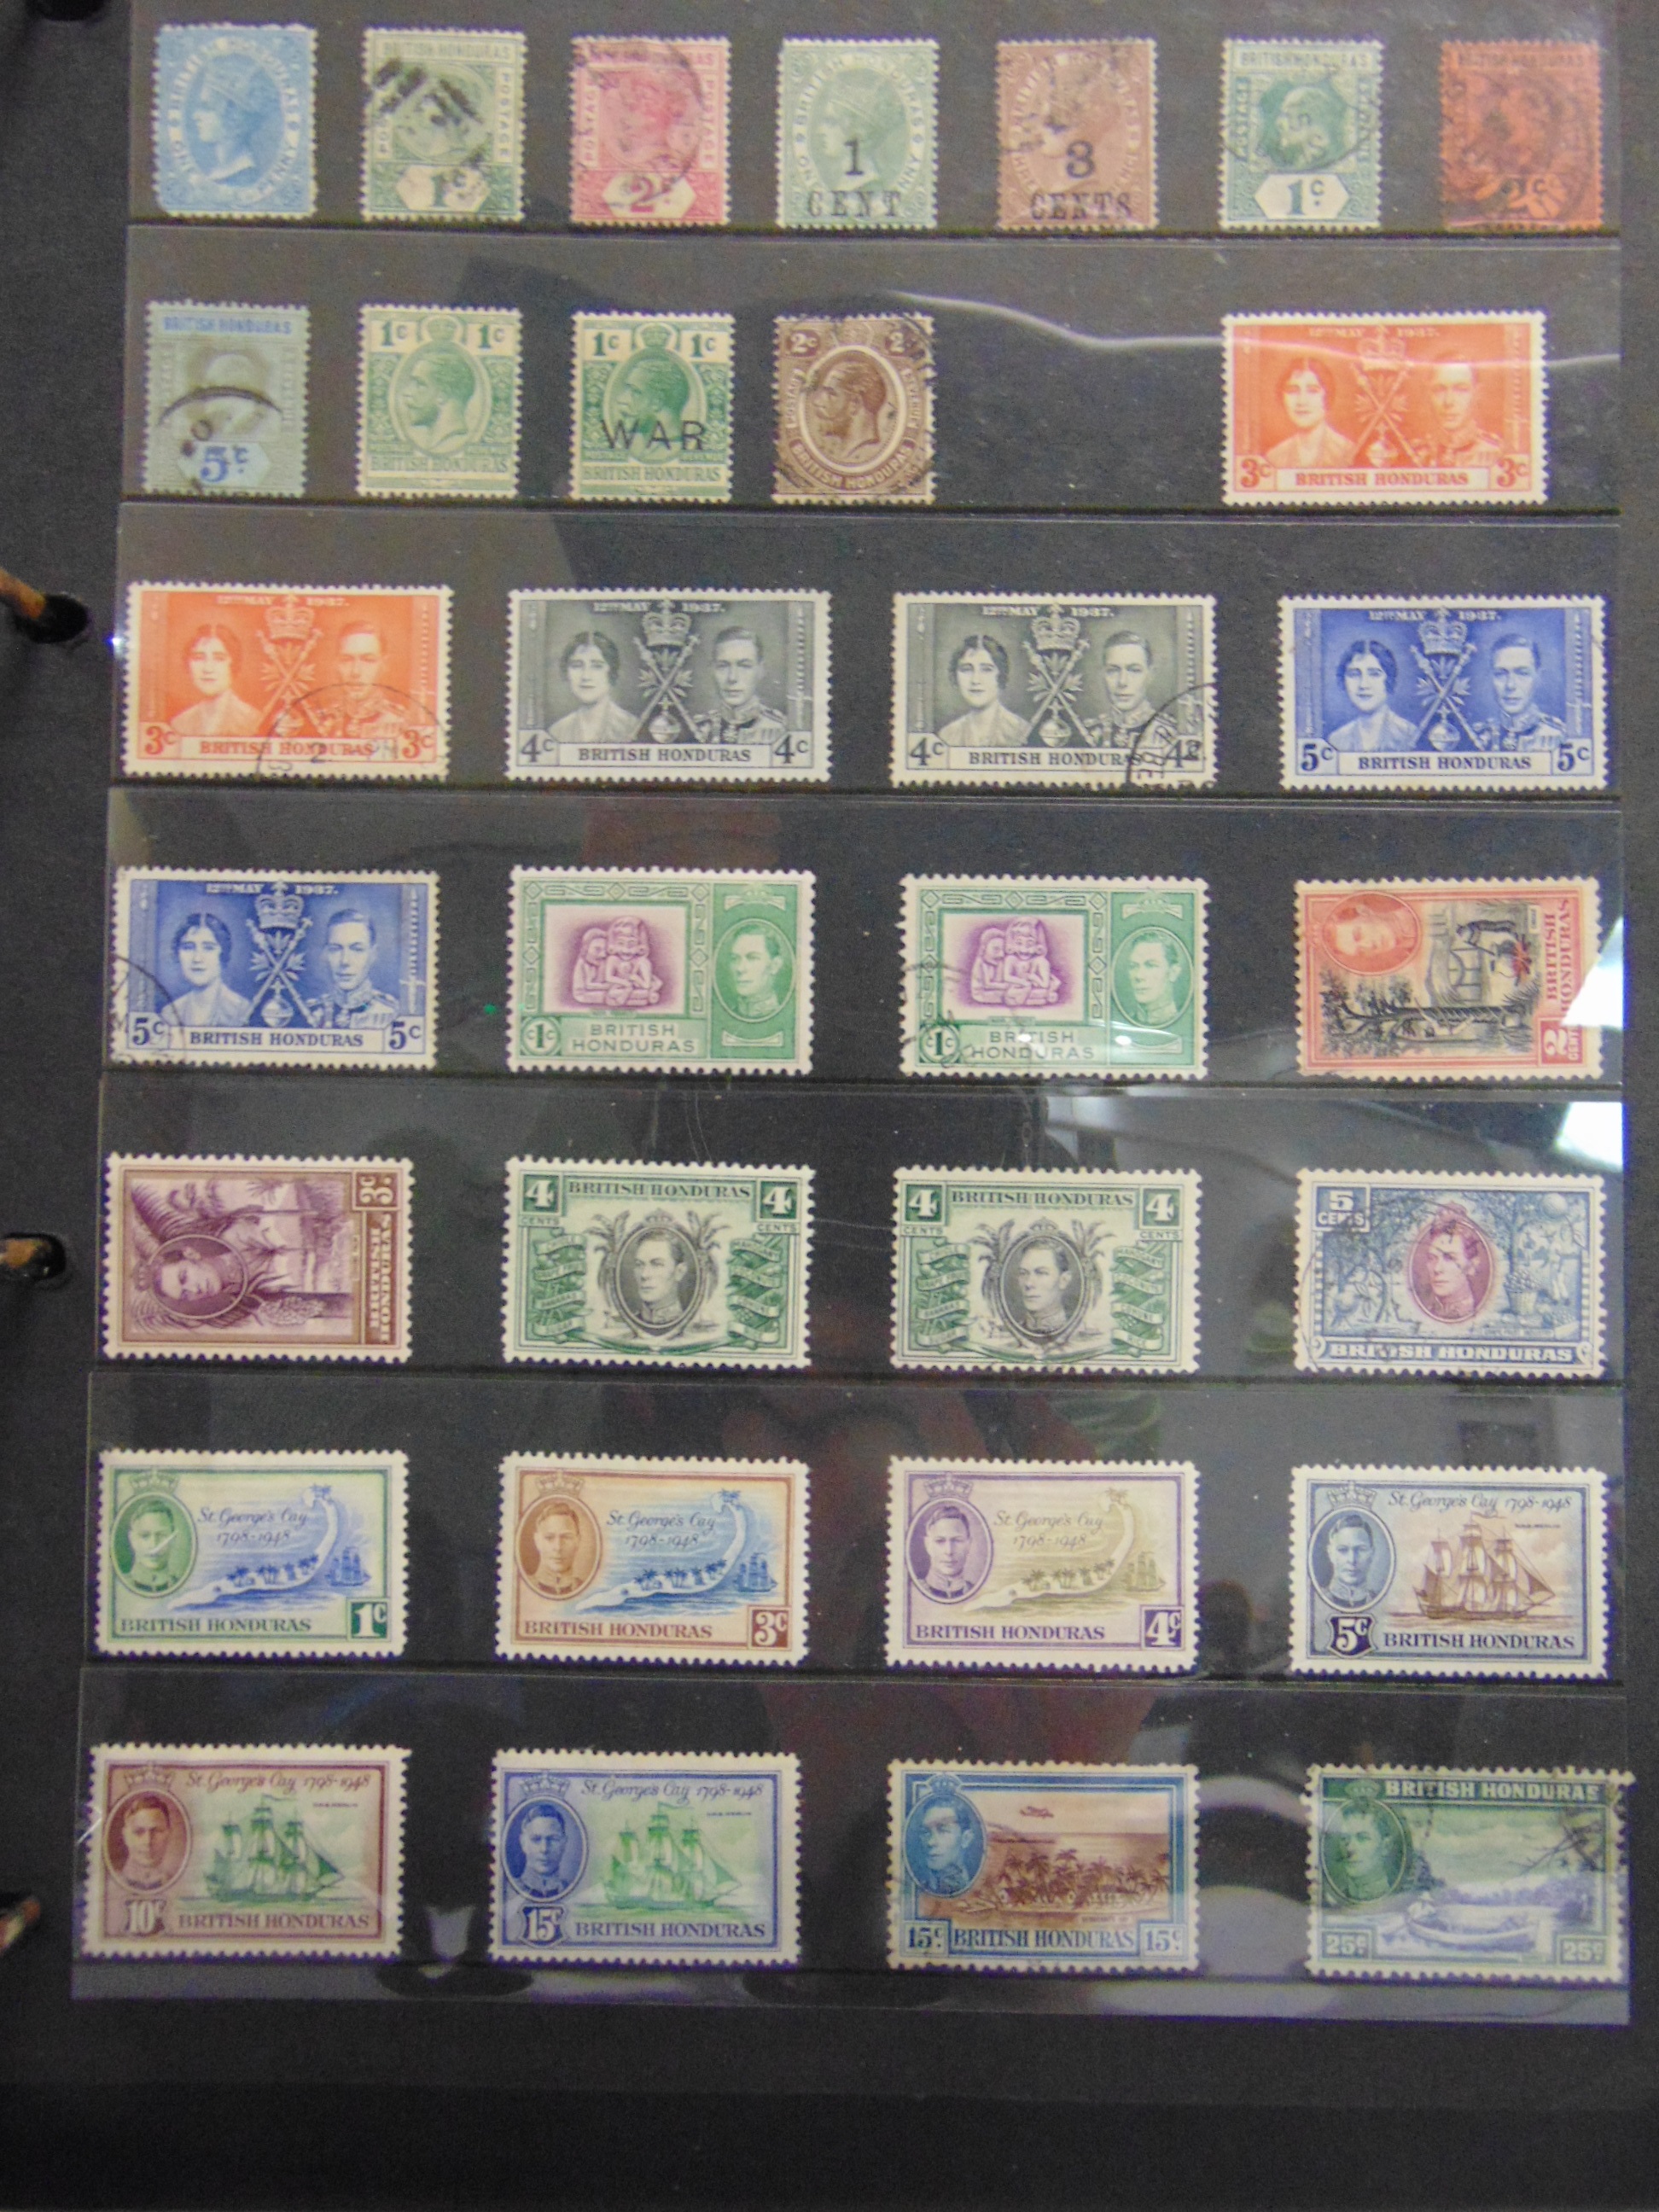 STAMPS - A PART-WORLD COLLECTION including Antigua, Ascension, Bechuanaland, Botswana, Barbados, - Image 5 of 8